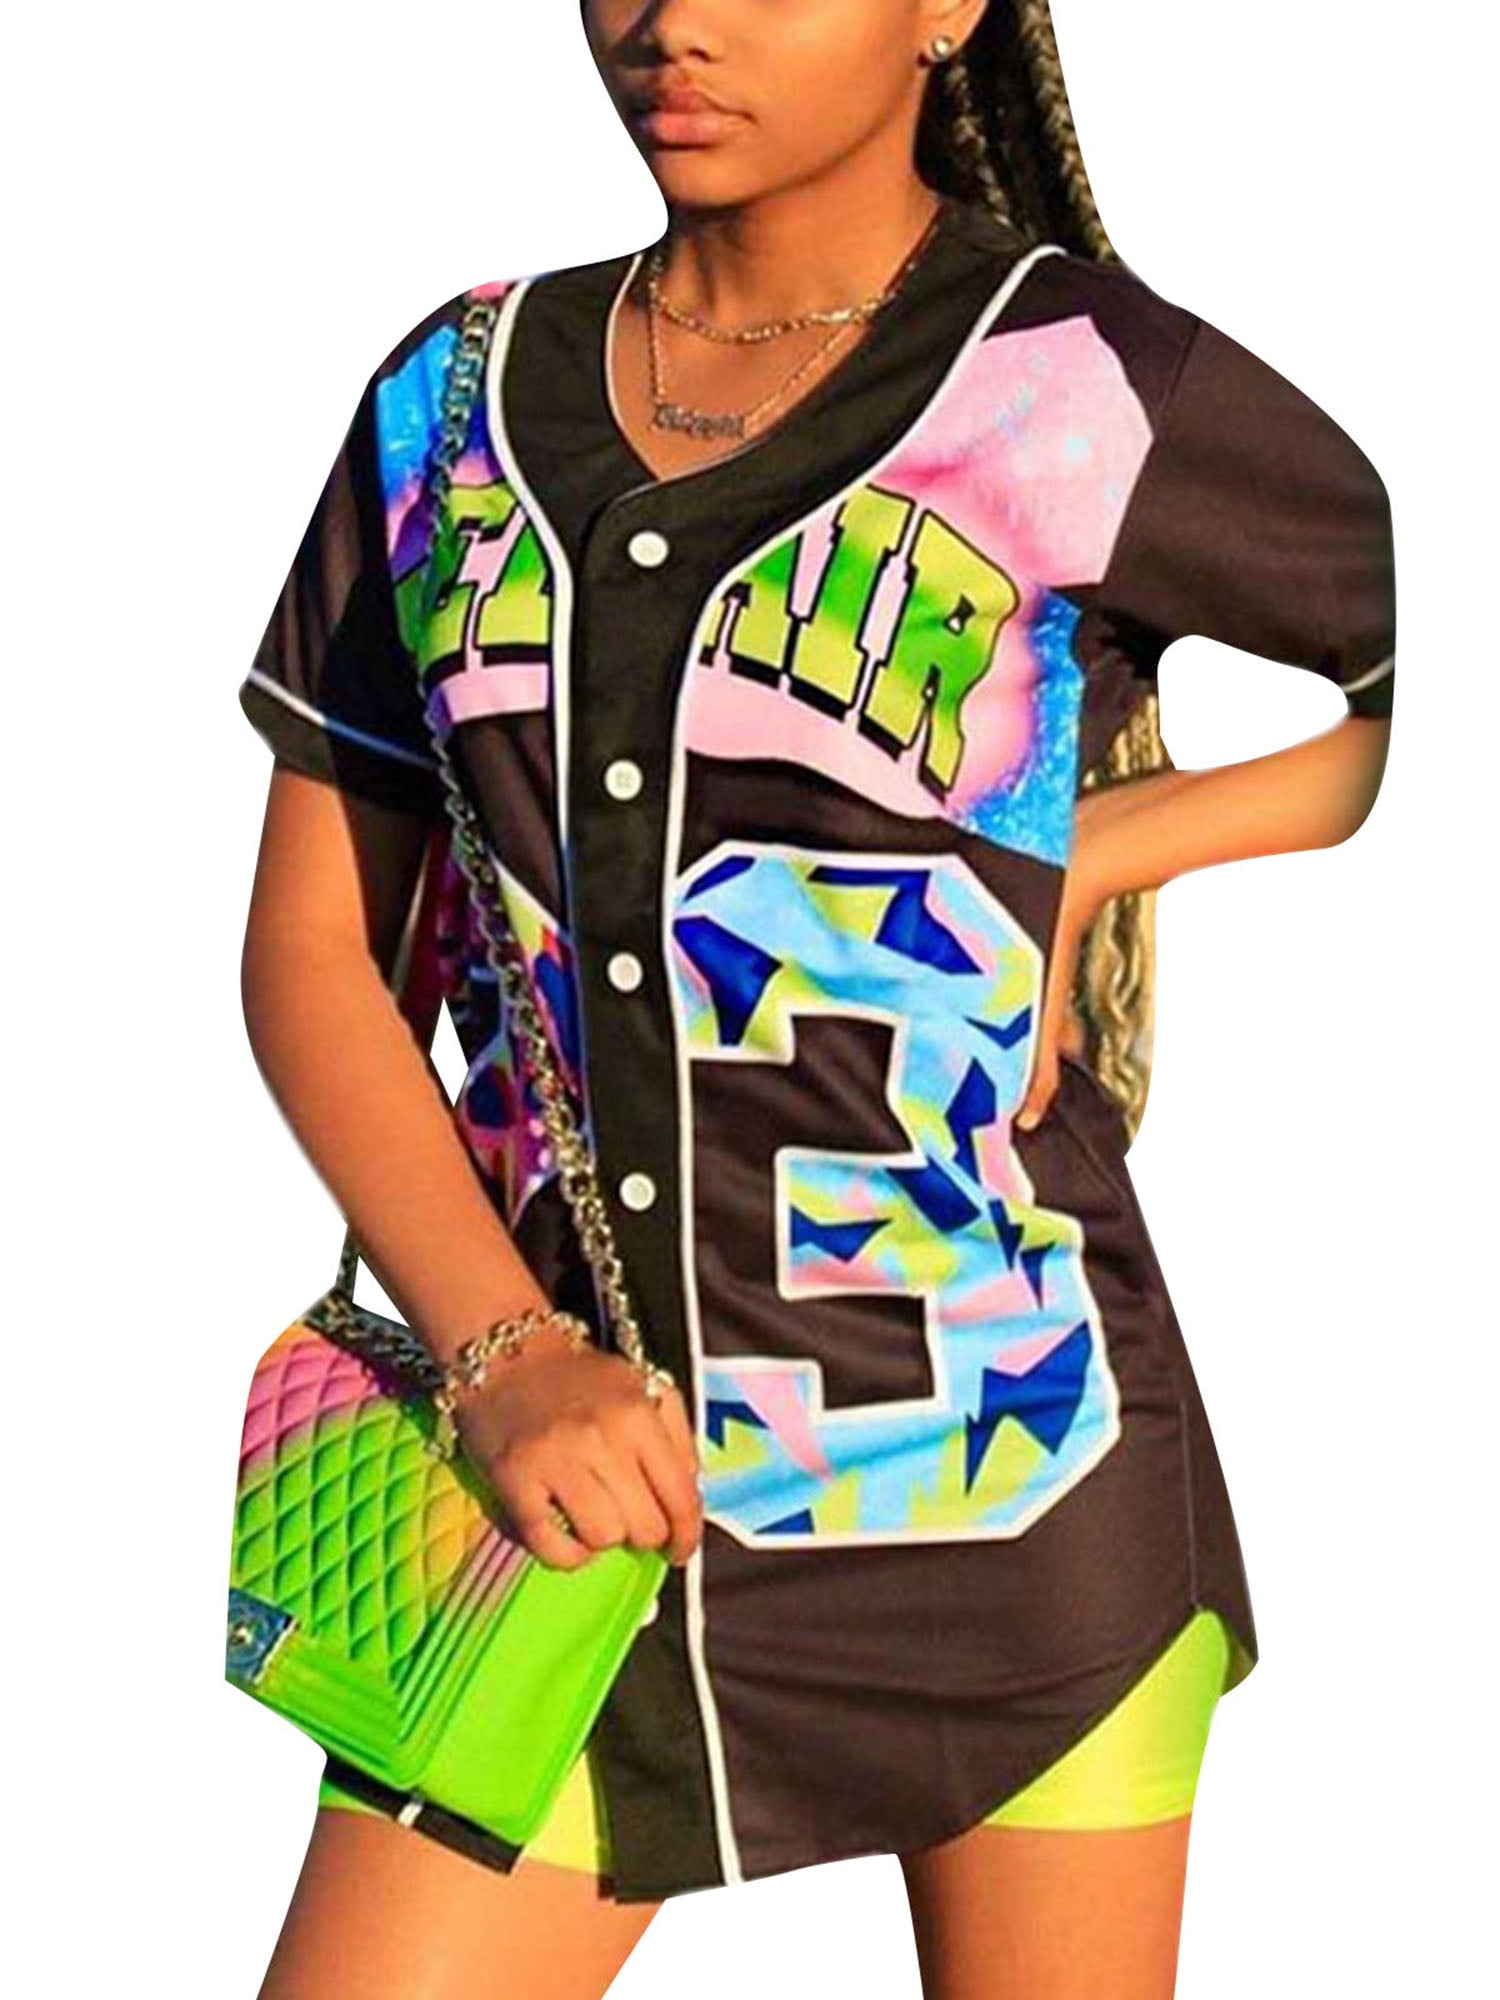 23 Bel Air Jersey 90s Short Sleeve Shirts Hip Hop Tops Clothes for Birthday Party 3D Print Fashion Baseball Jersey 